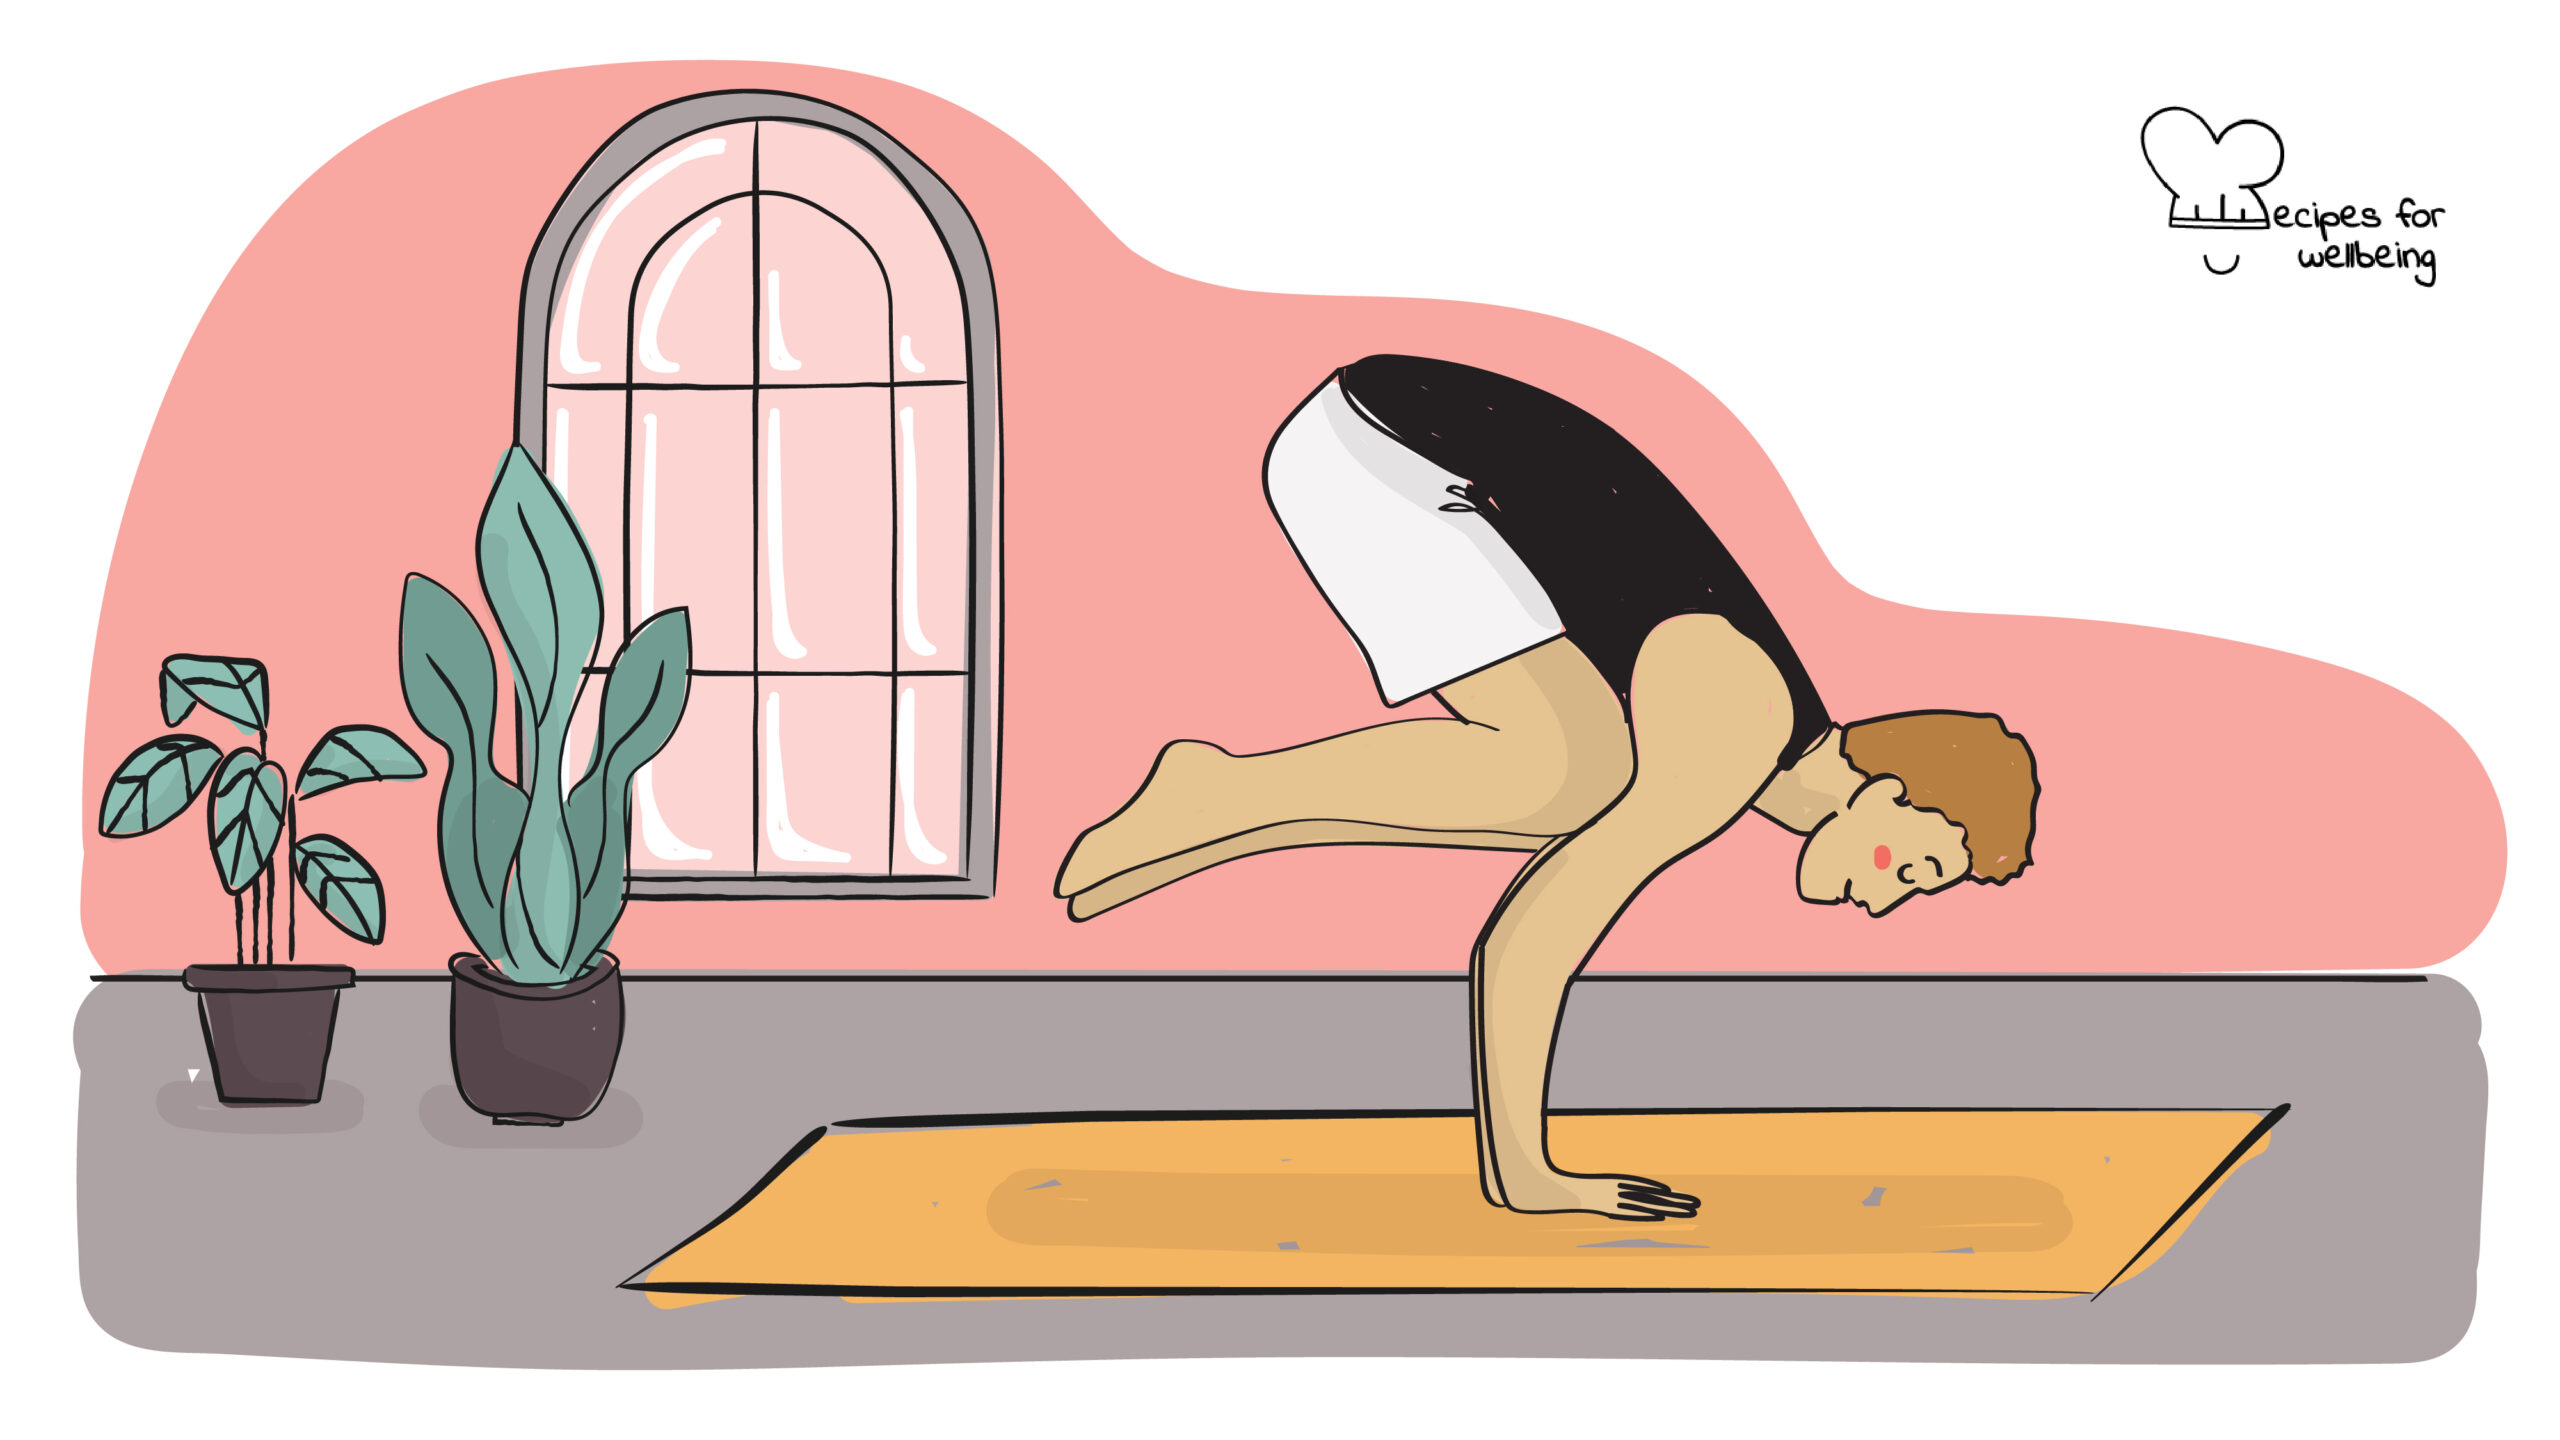 Illustration of a person in Bakasana (crow pose). © Recipes for Wellbeing